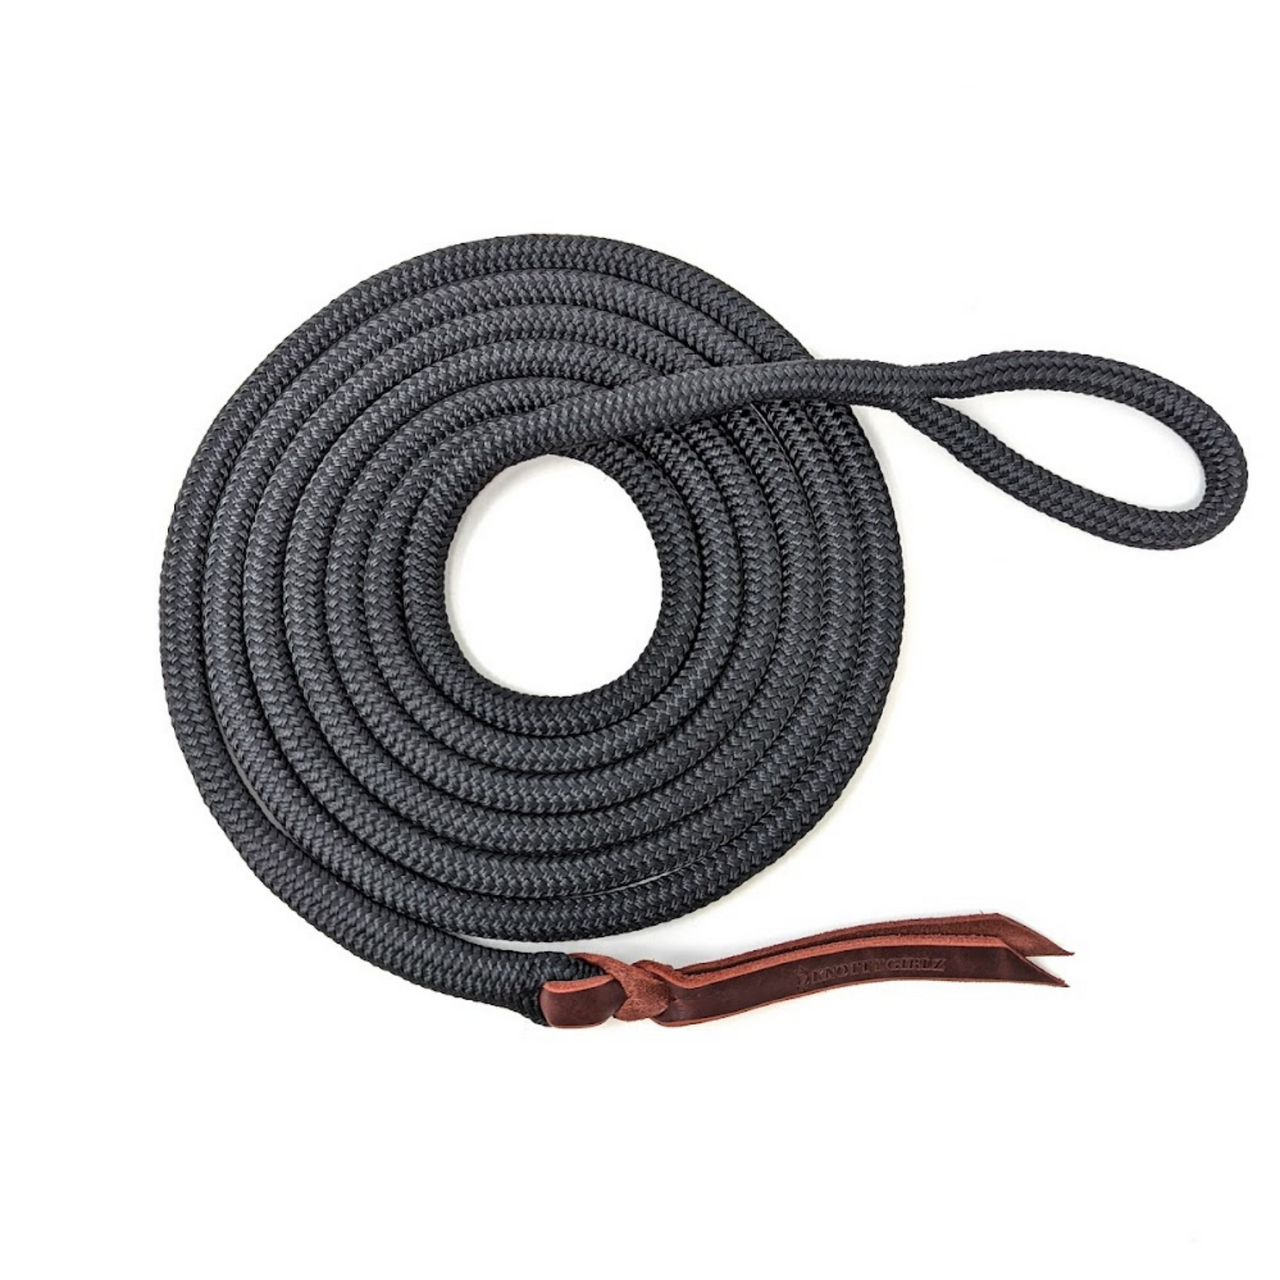 Climb Right Rope Grab (Fits 1/2 inch - 5/8 inch Rope)